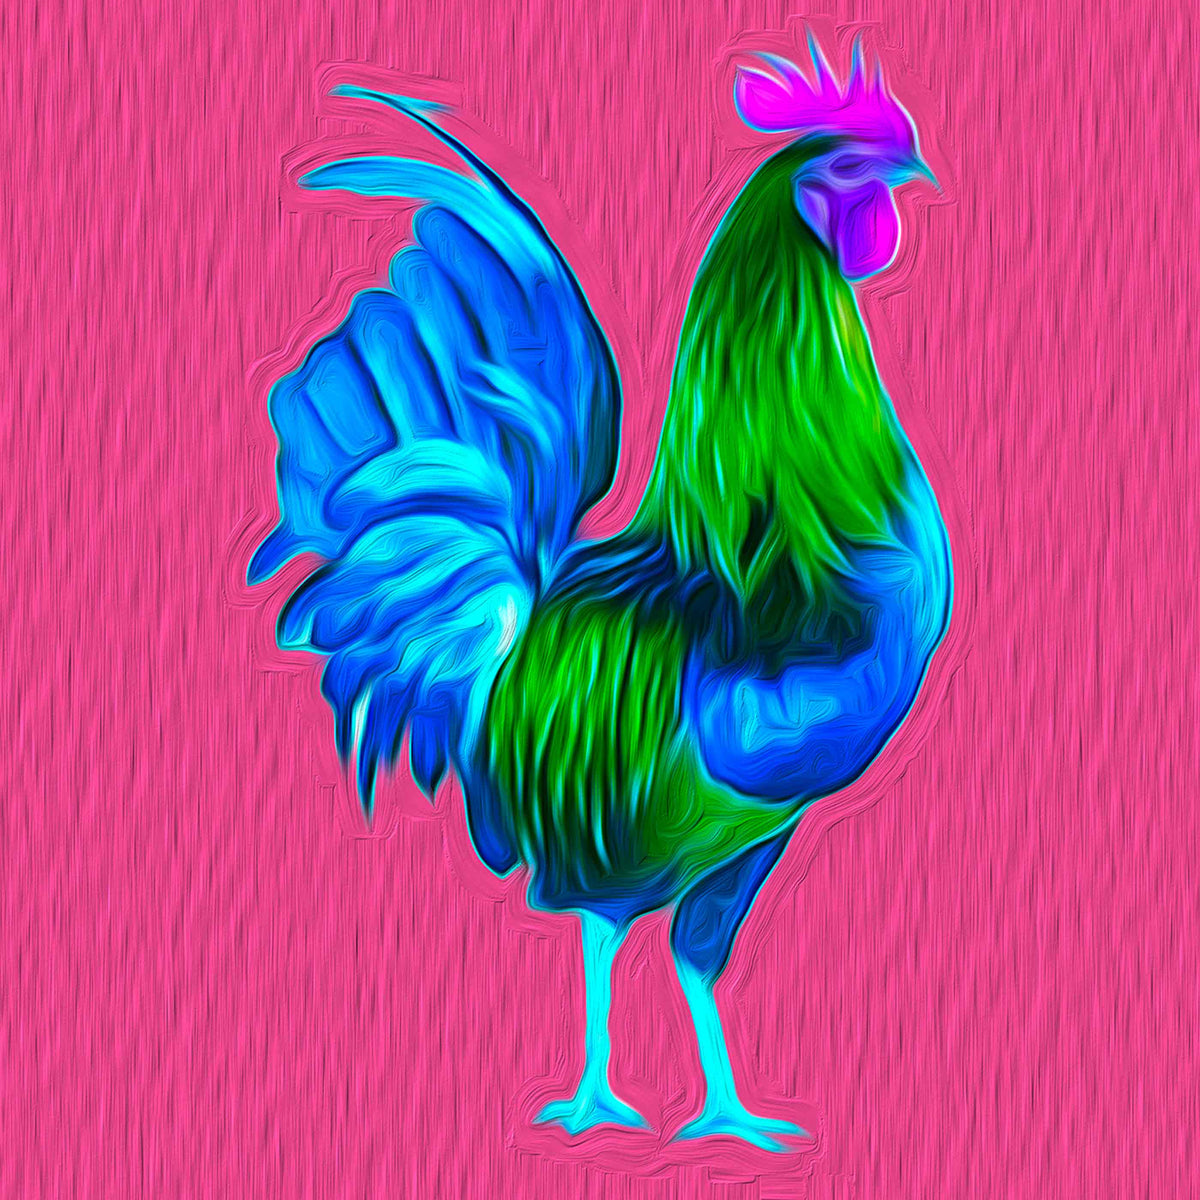 Warhol Rooster I (limited to 10)